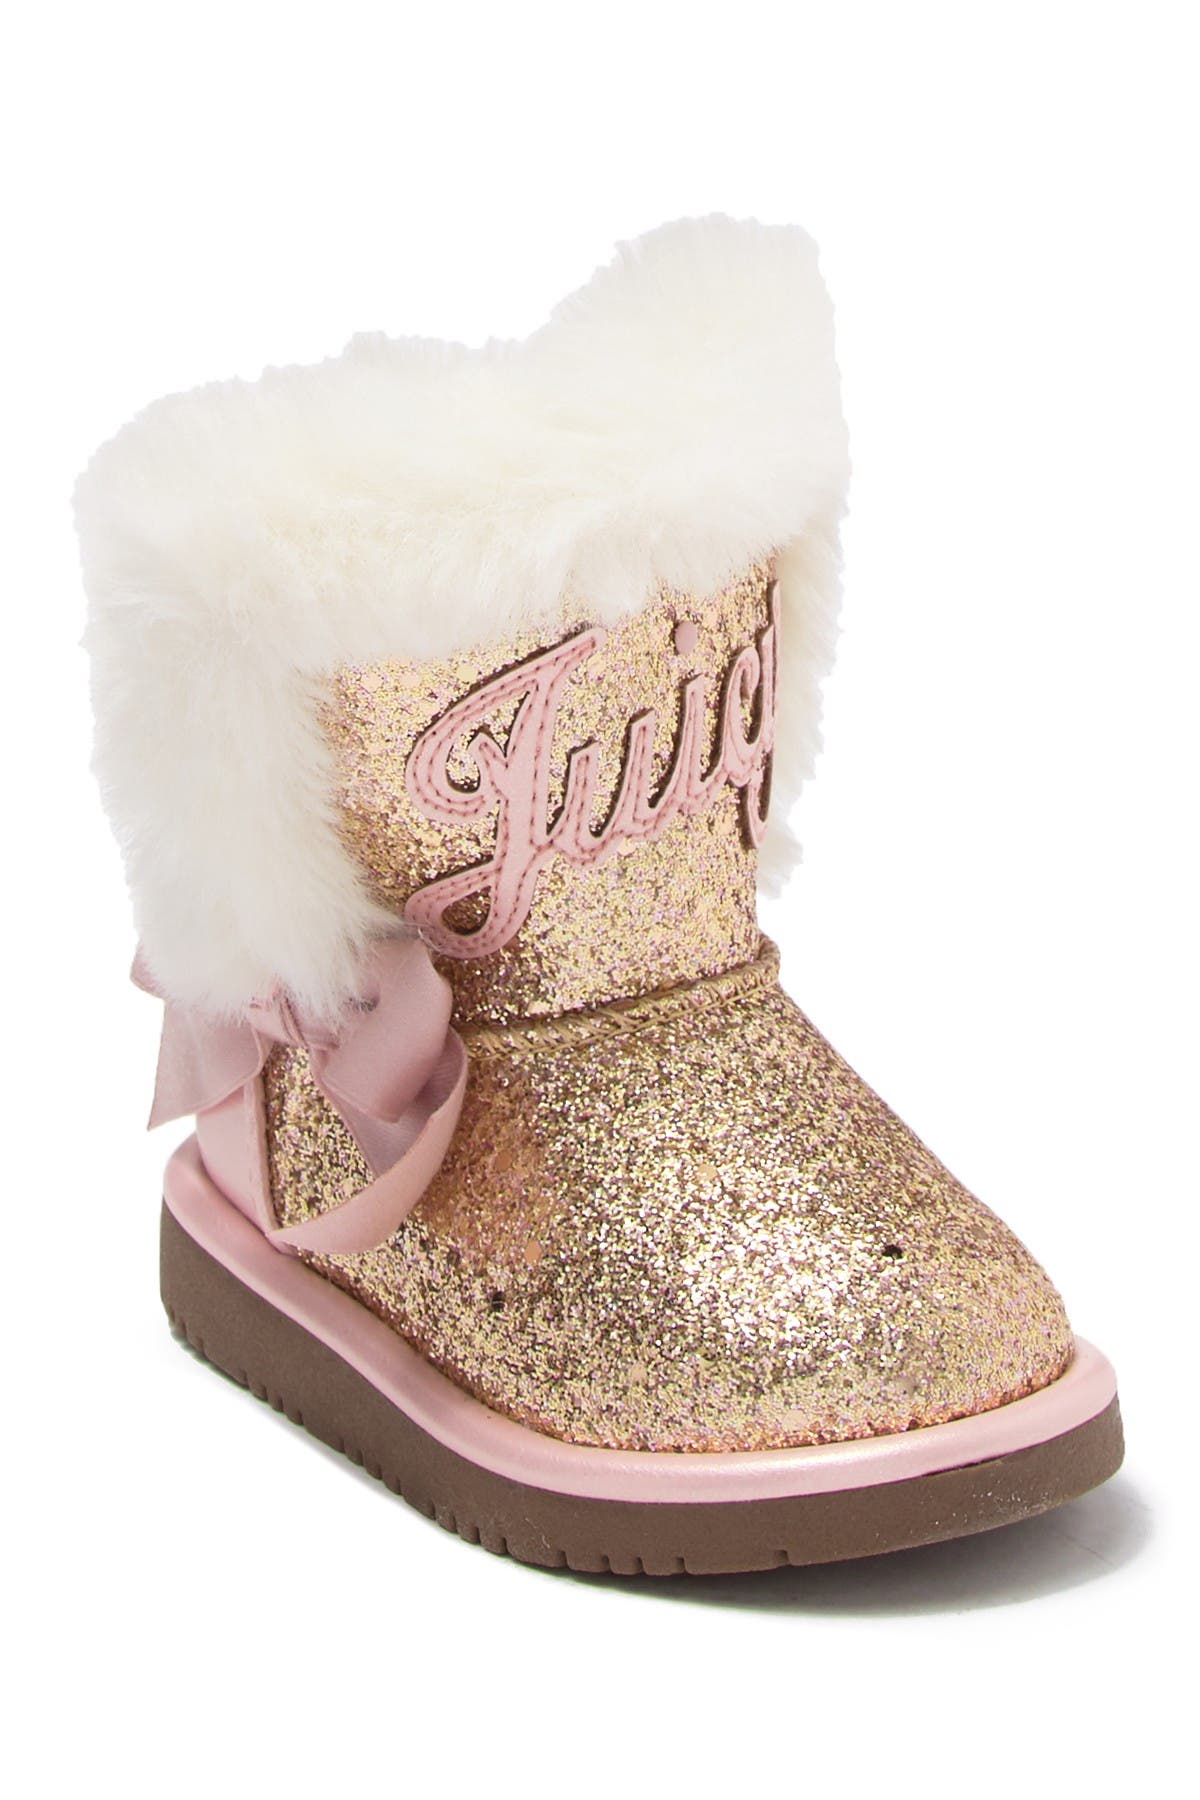 Juicy Couture | Faux Fur Trimmed Glitter Boot | Nordstrom Rack